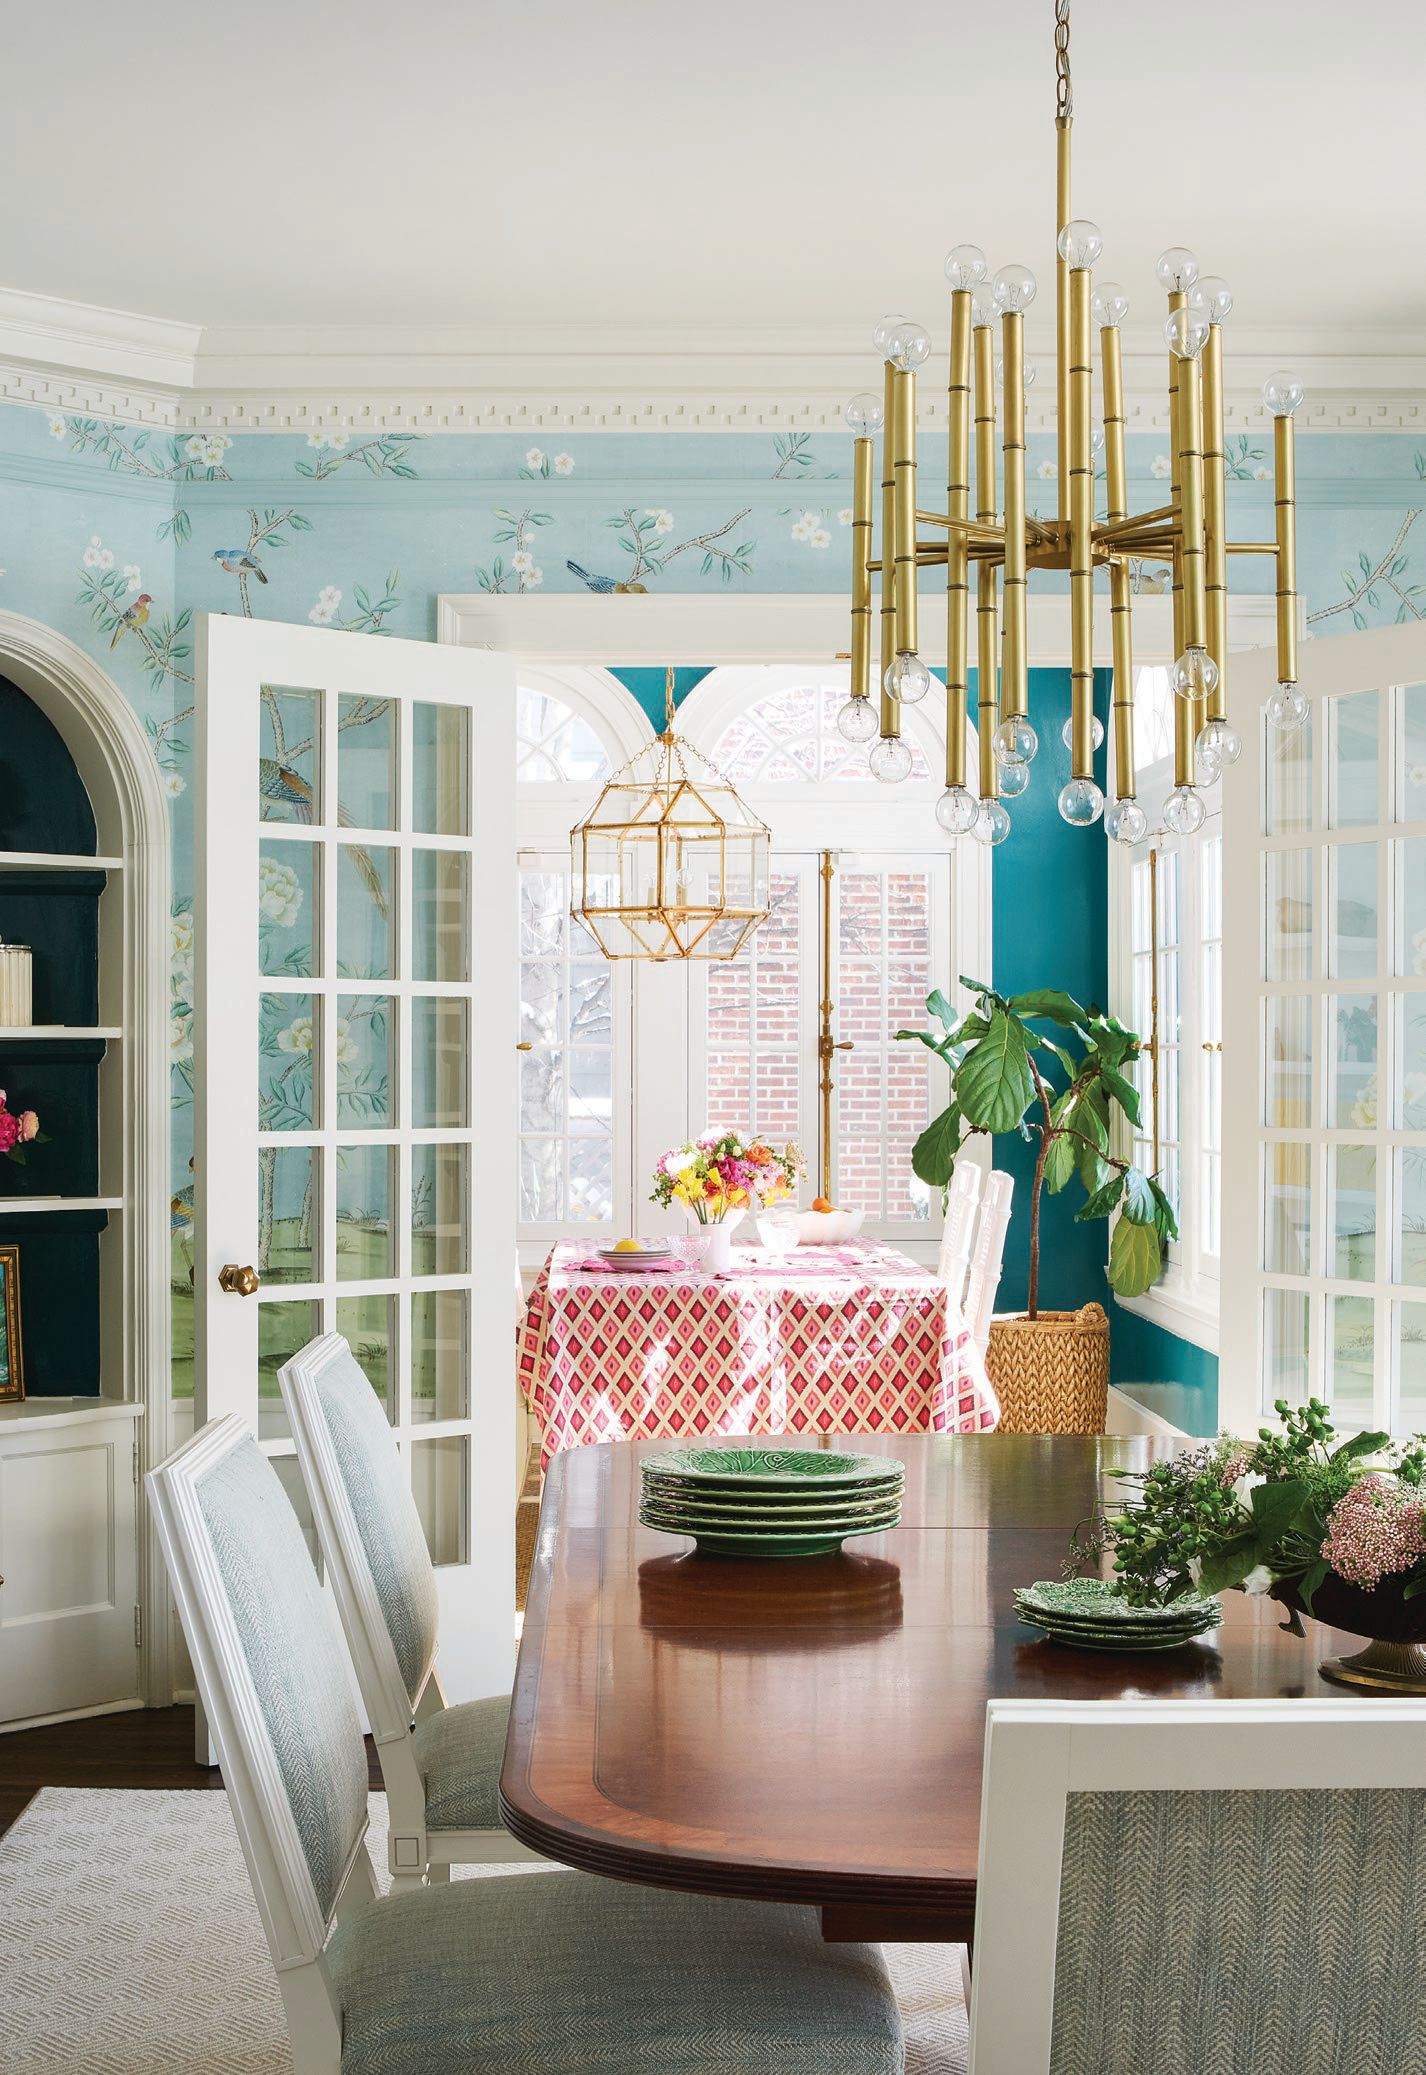 The light-filled dining room enchants with chinoiserie wallpaper by The Mural Source.